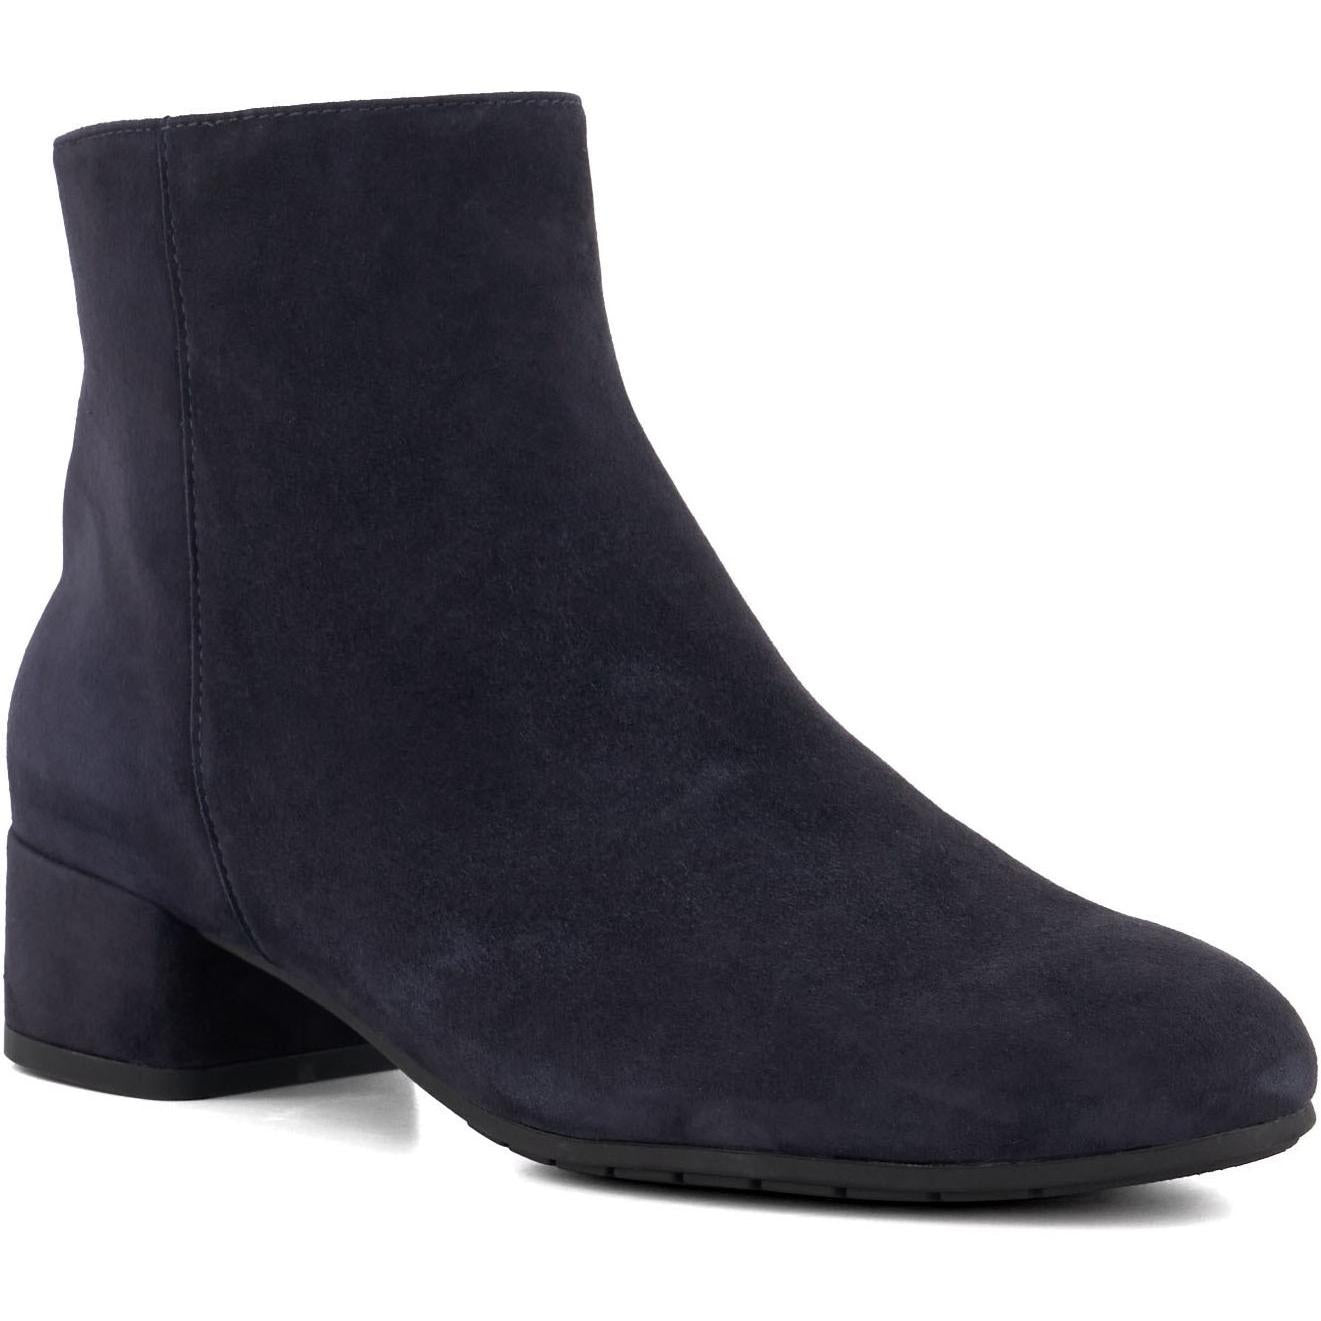 Dune London Pippie Mid Boot